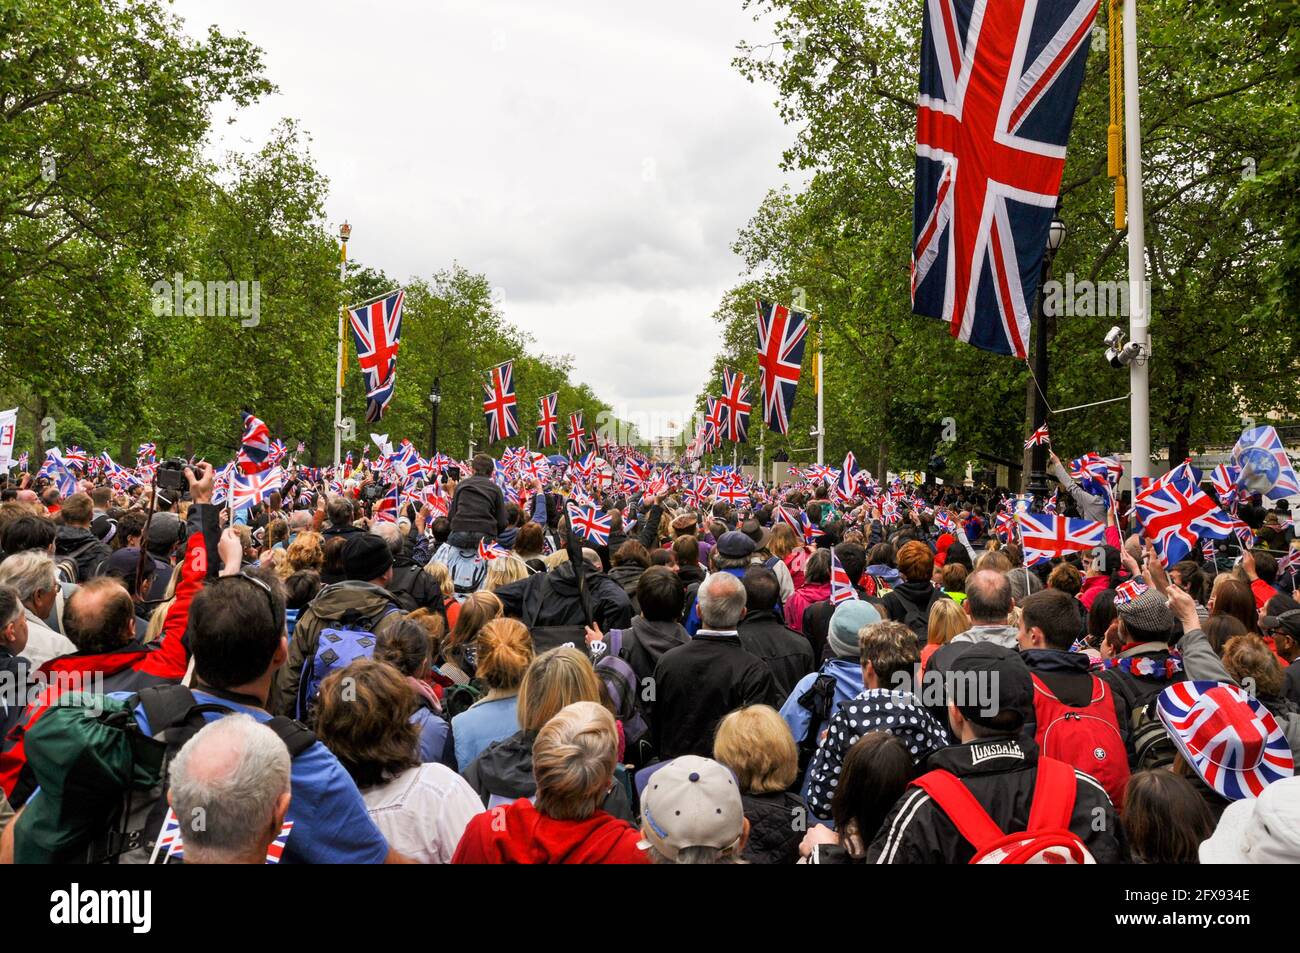 Crowds fill The Mall heading towards Buckingham Palace hoping for a view of The Queen at the Queens Diamond Jubilee celebration in London, UK Stock Photo